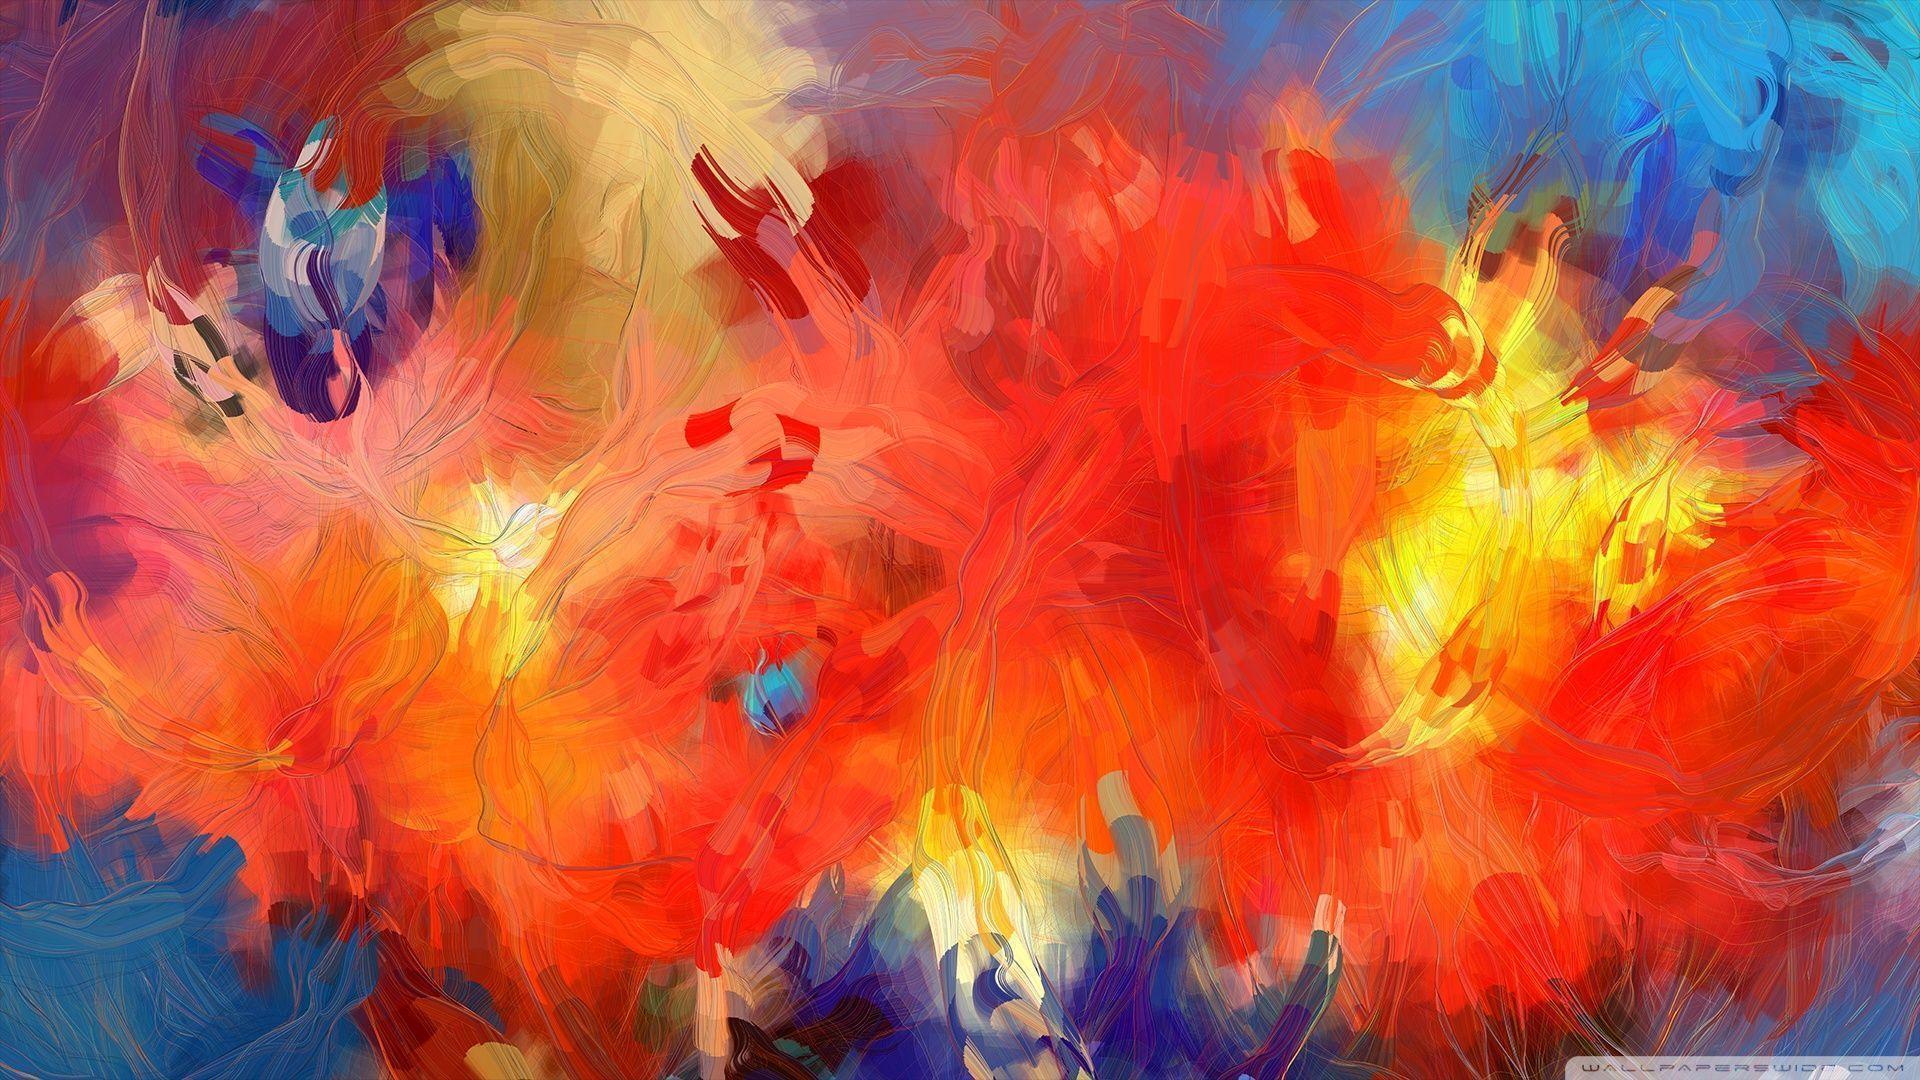 Abstract Art Wallpapers 1920x1080